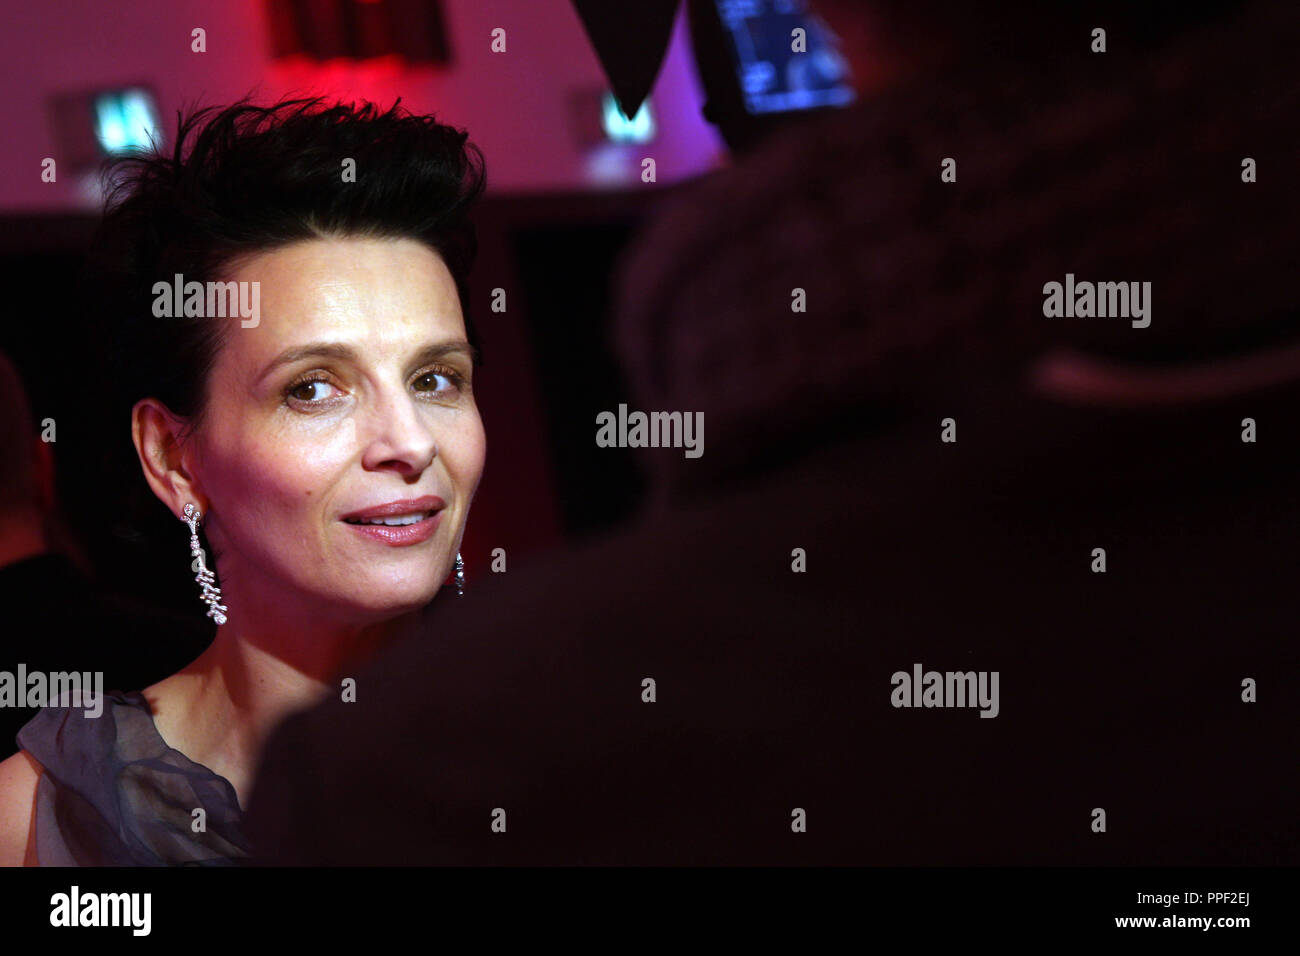 Candy manufacturer Ferrero ('Mon cheri') celebrates Barbara day at Postpalast in Munich, Germany. It's a night of fundraising for a children's foundation. Portrait of french actress Juliette Binoche Stock Photo